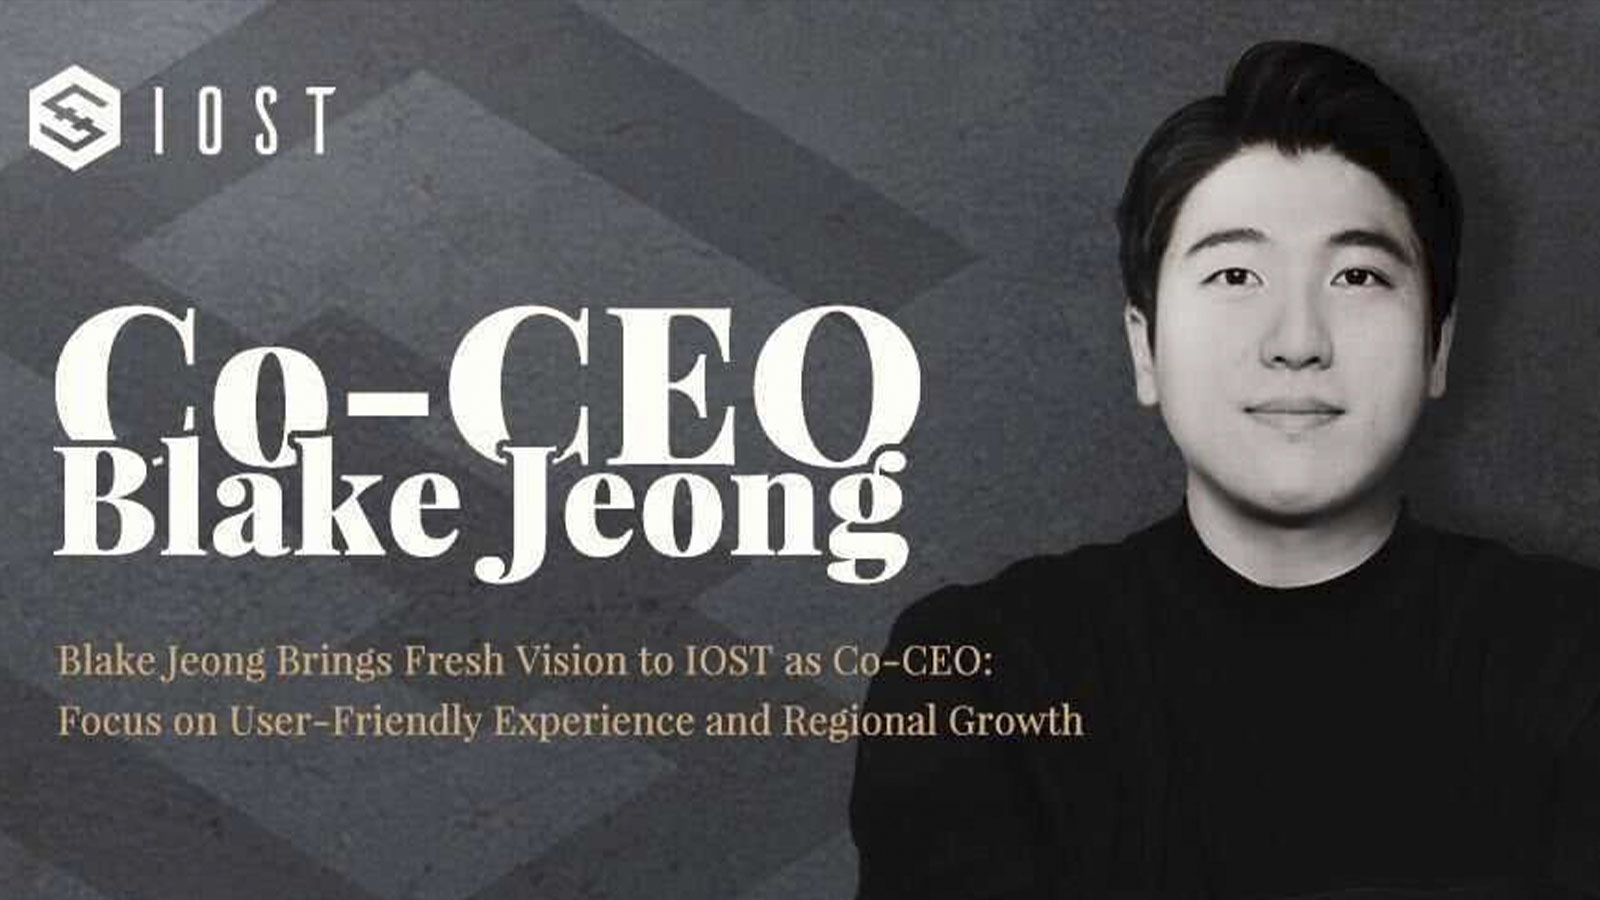 Blake Jeong Brings Fresh Vision to IOST as Co-CEO: Focus on User-Friendly Experience and Regional Growth